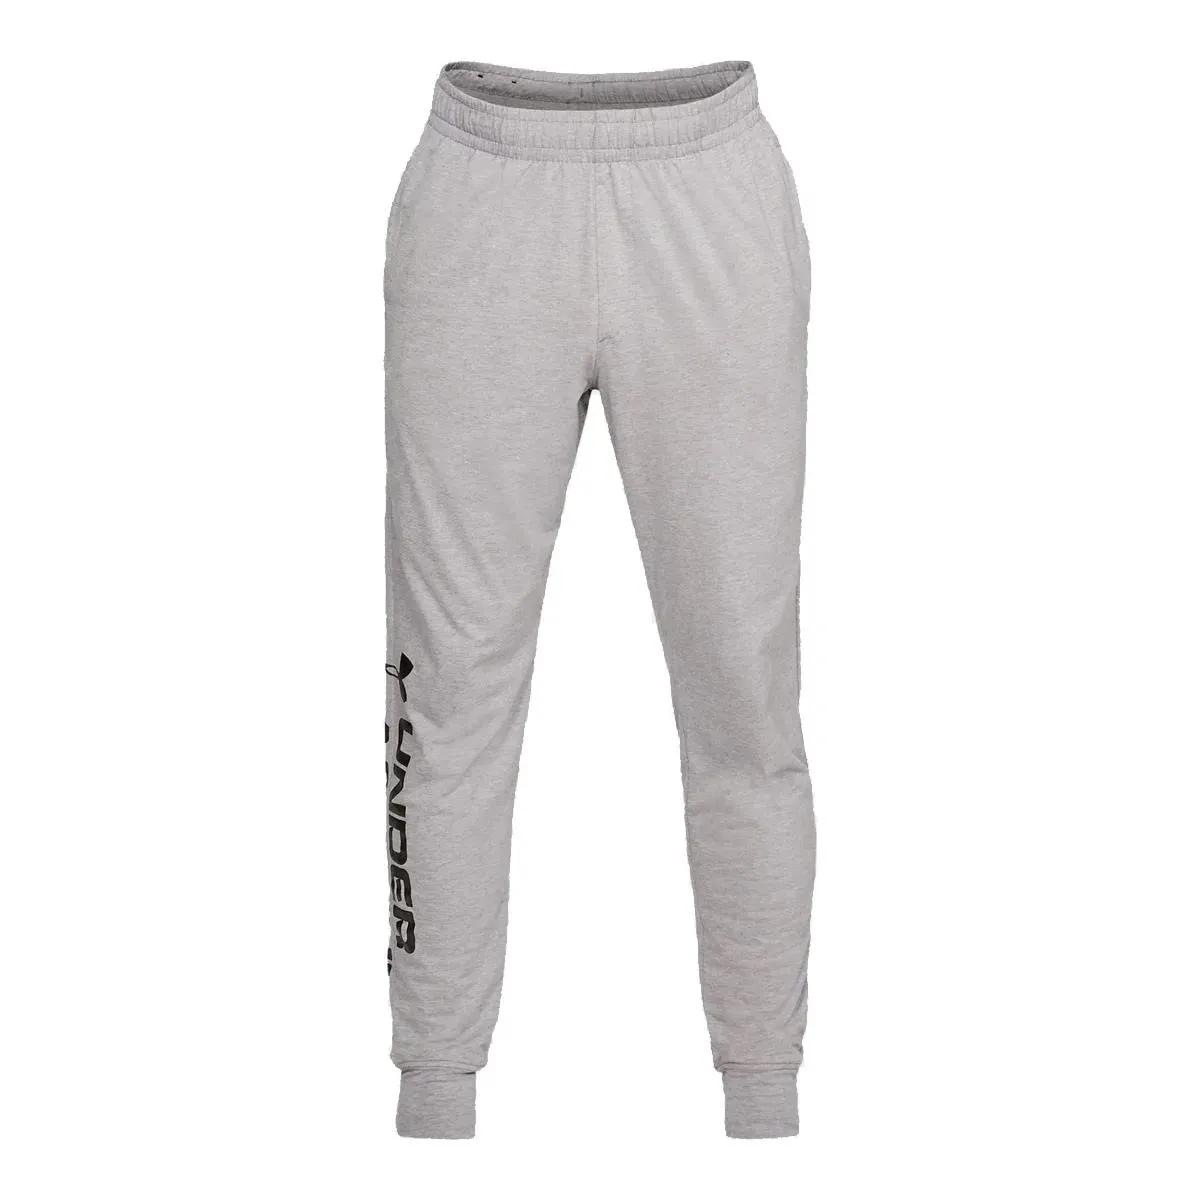 Under Armour Hlače SPORTSTYLE COTTON GRAPHIC JOGGER 